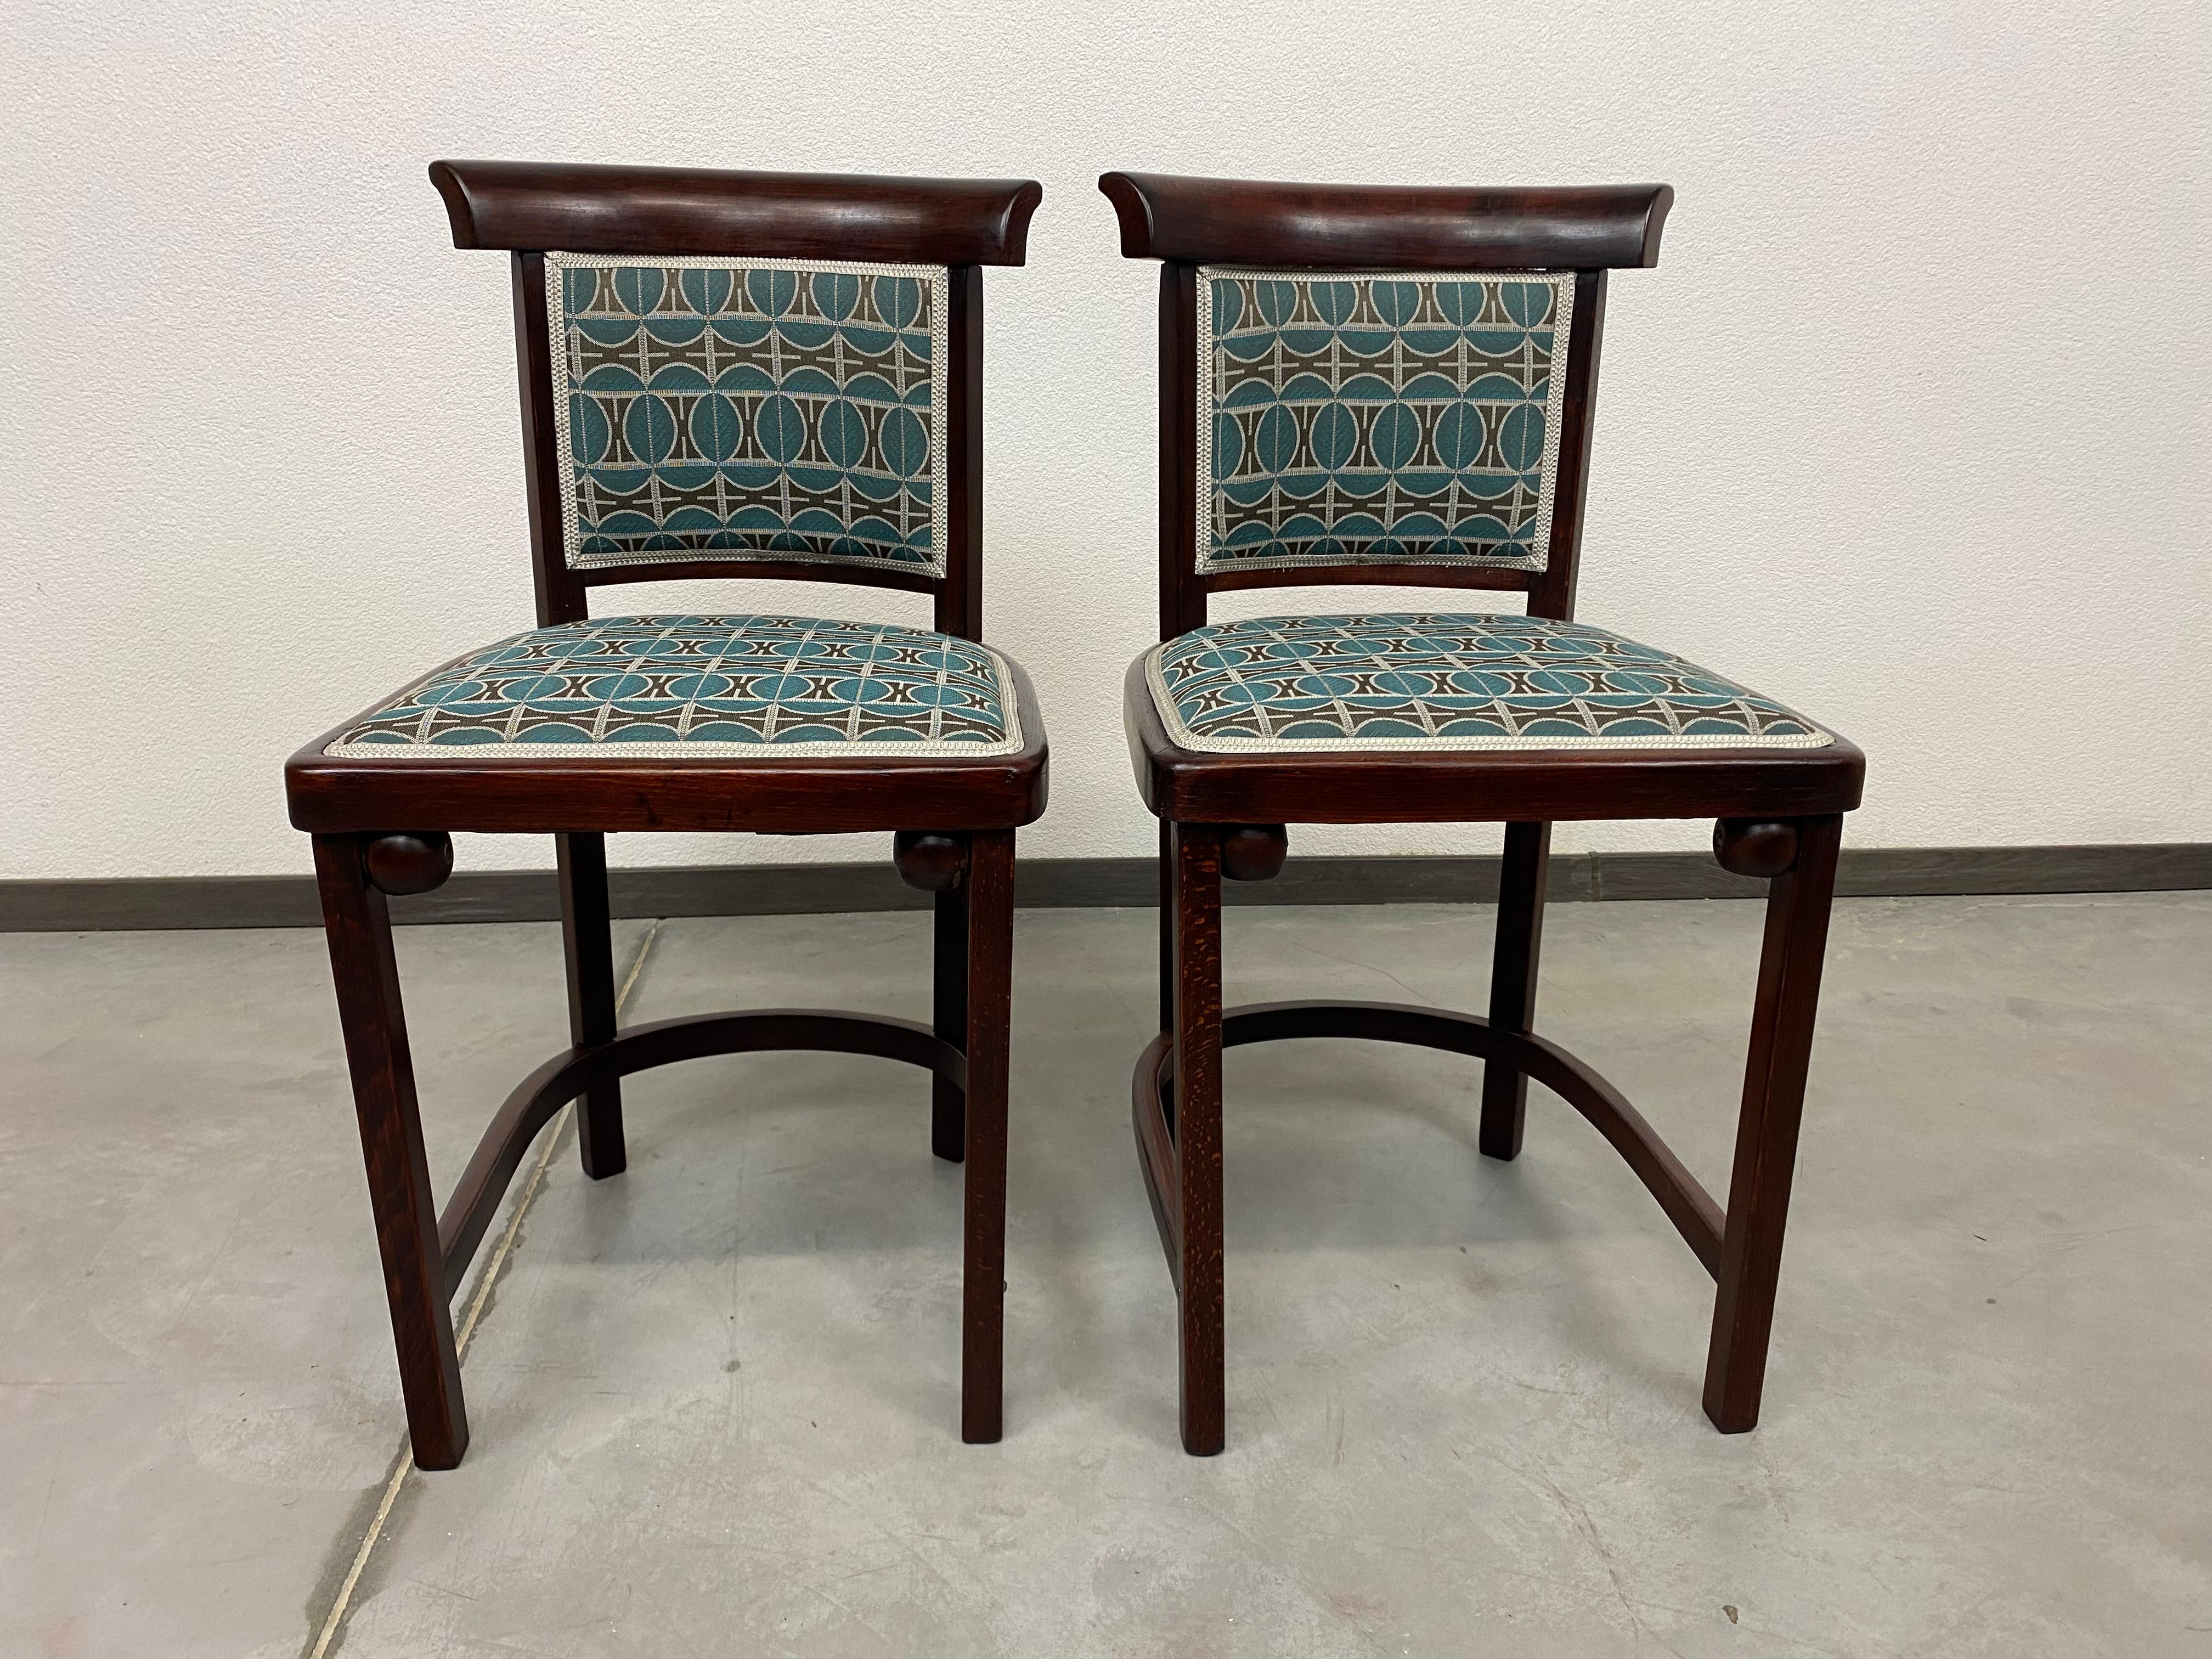 Pair of Cabaret Fledermaus chairs no.423 by Josef Hoffmann for J&J Kohn after professional renovation with new fabric.